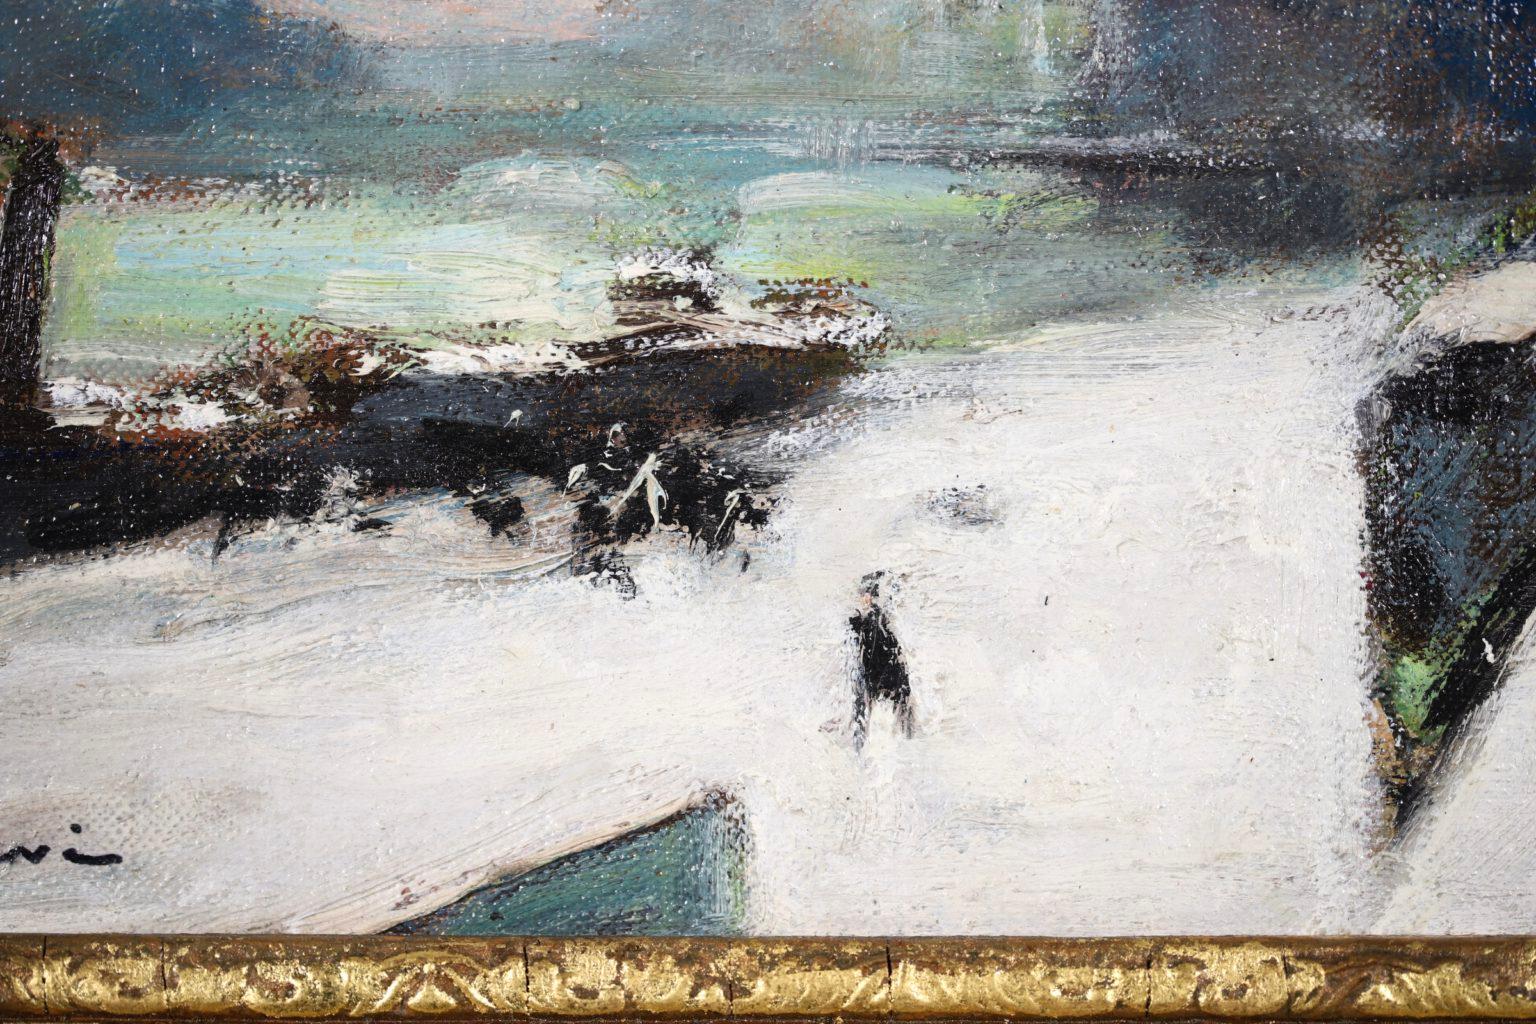 Seine in the Snow - Impressionist Oil, Figures in Riverscape by Jules Rene Herve - Brown Landscape Painting by Jules René Hervé